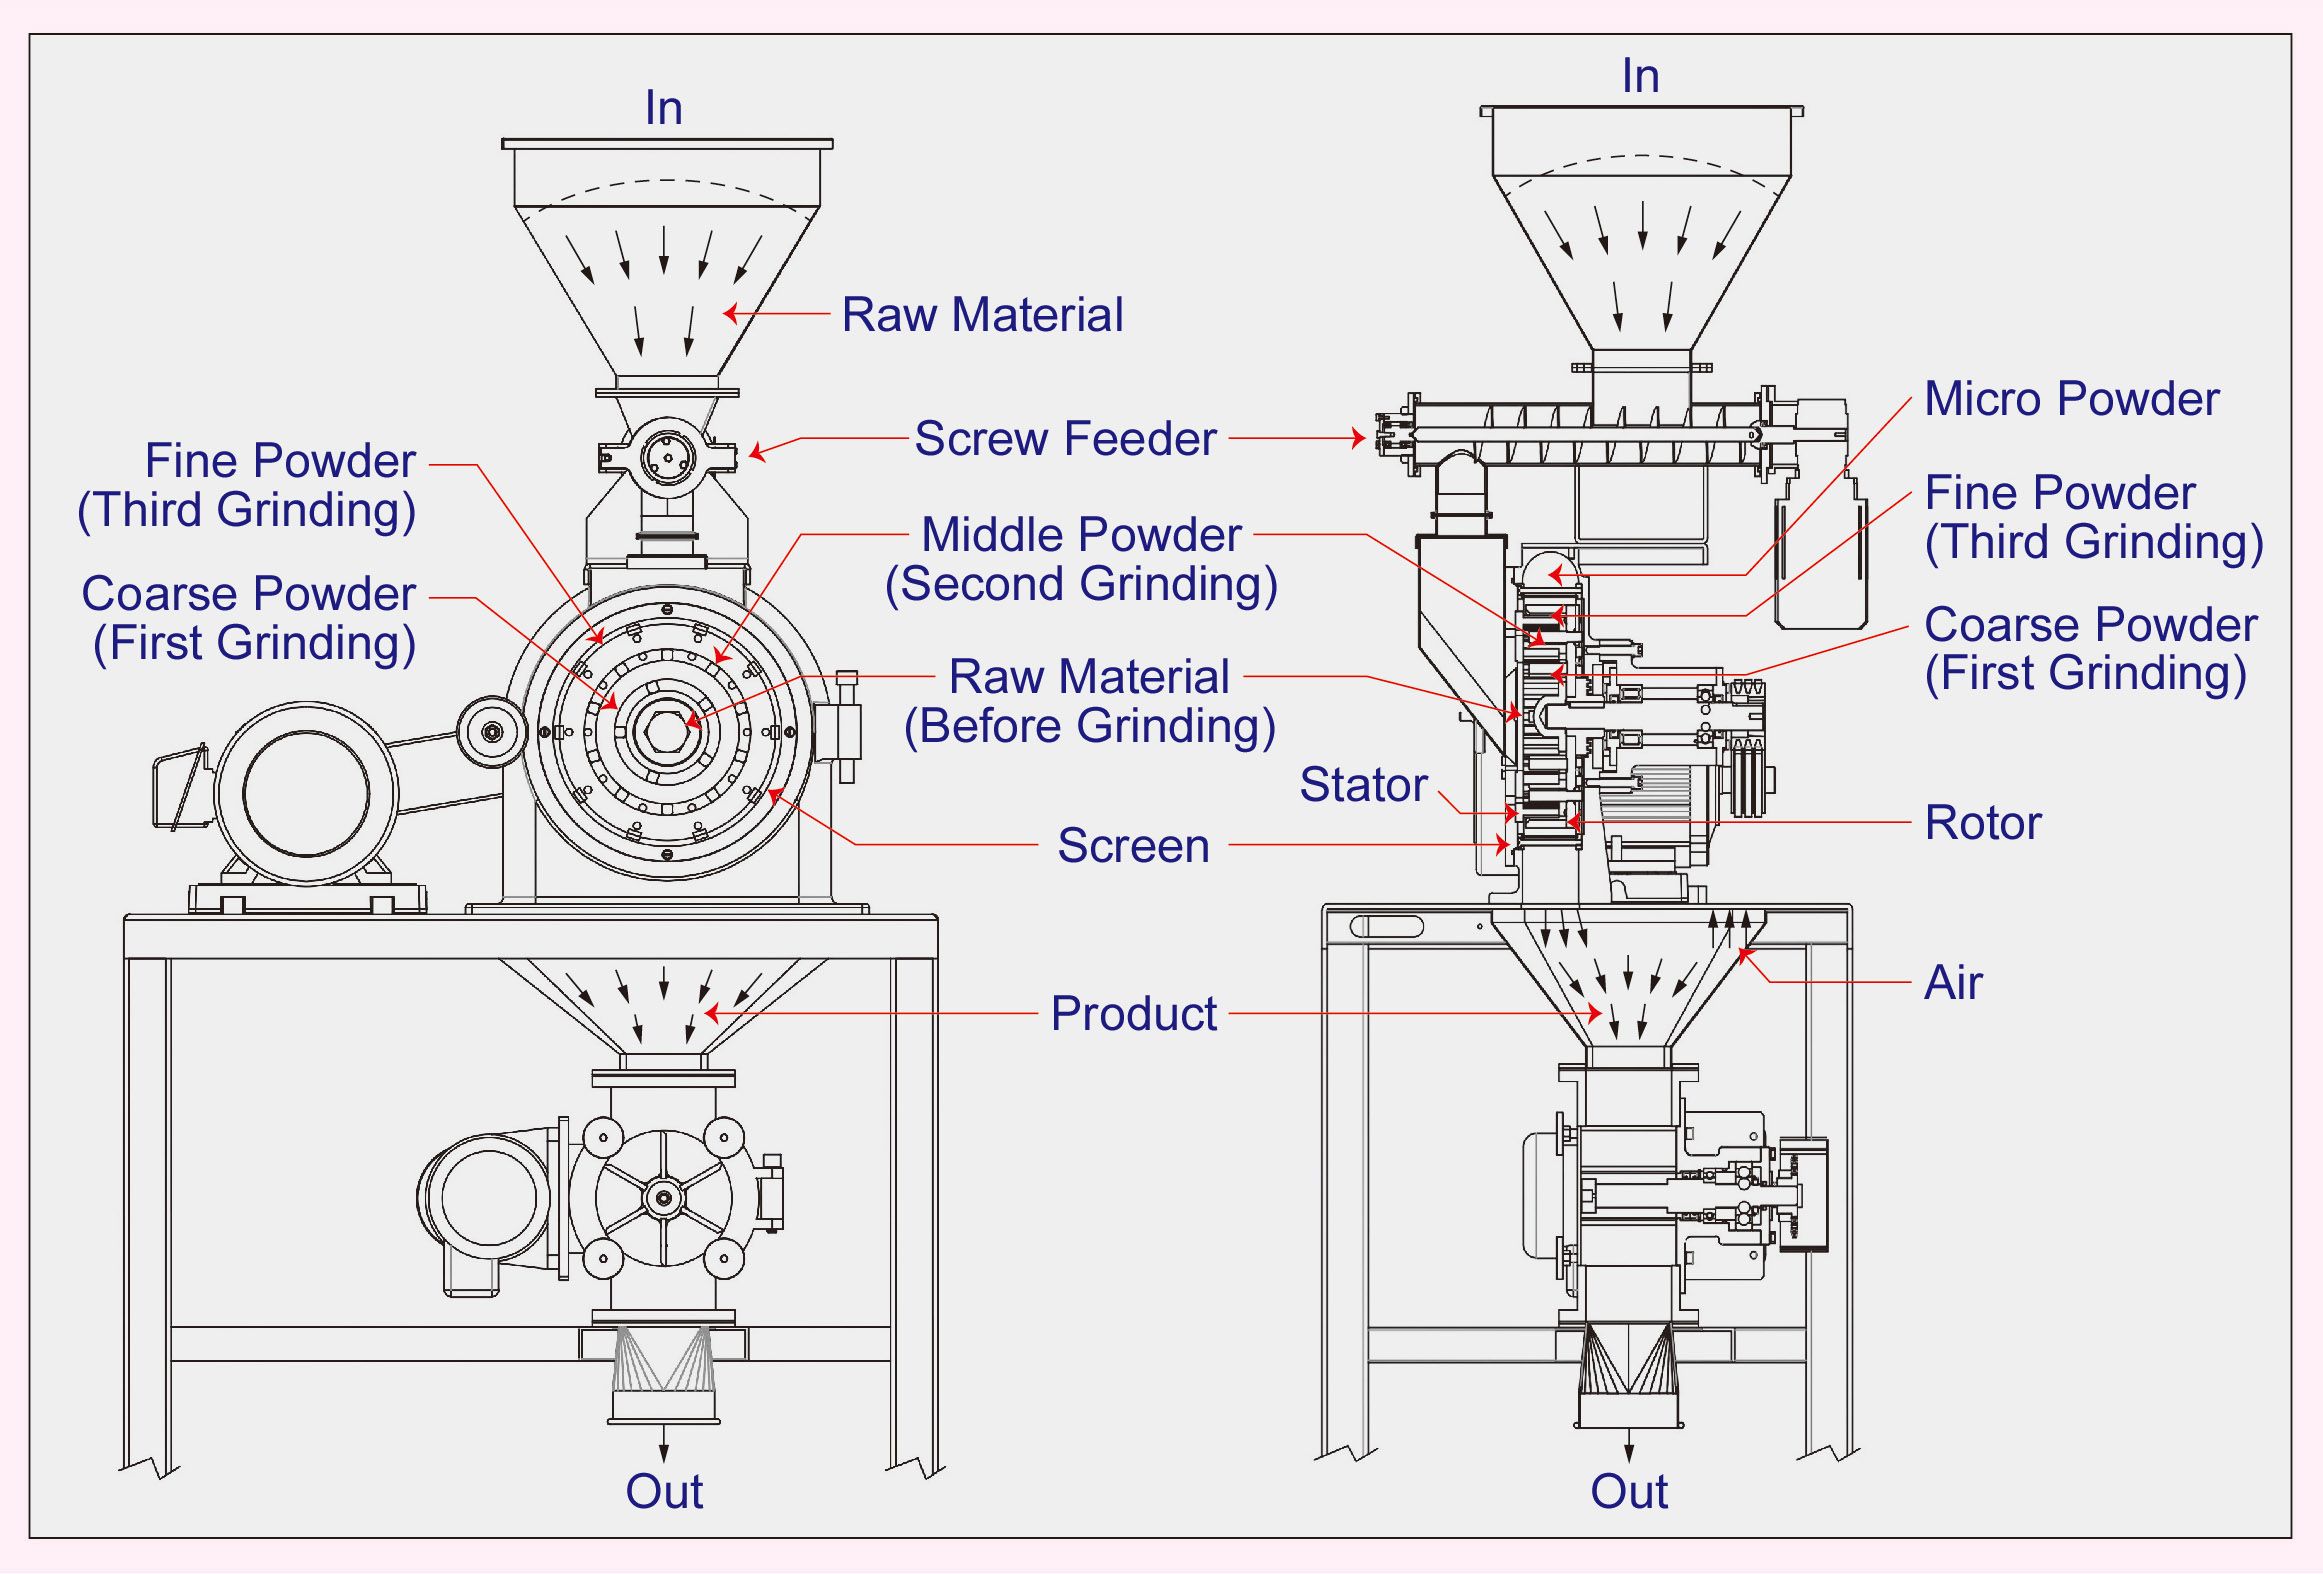 Pin Mill / Grinding And Mixing machine